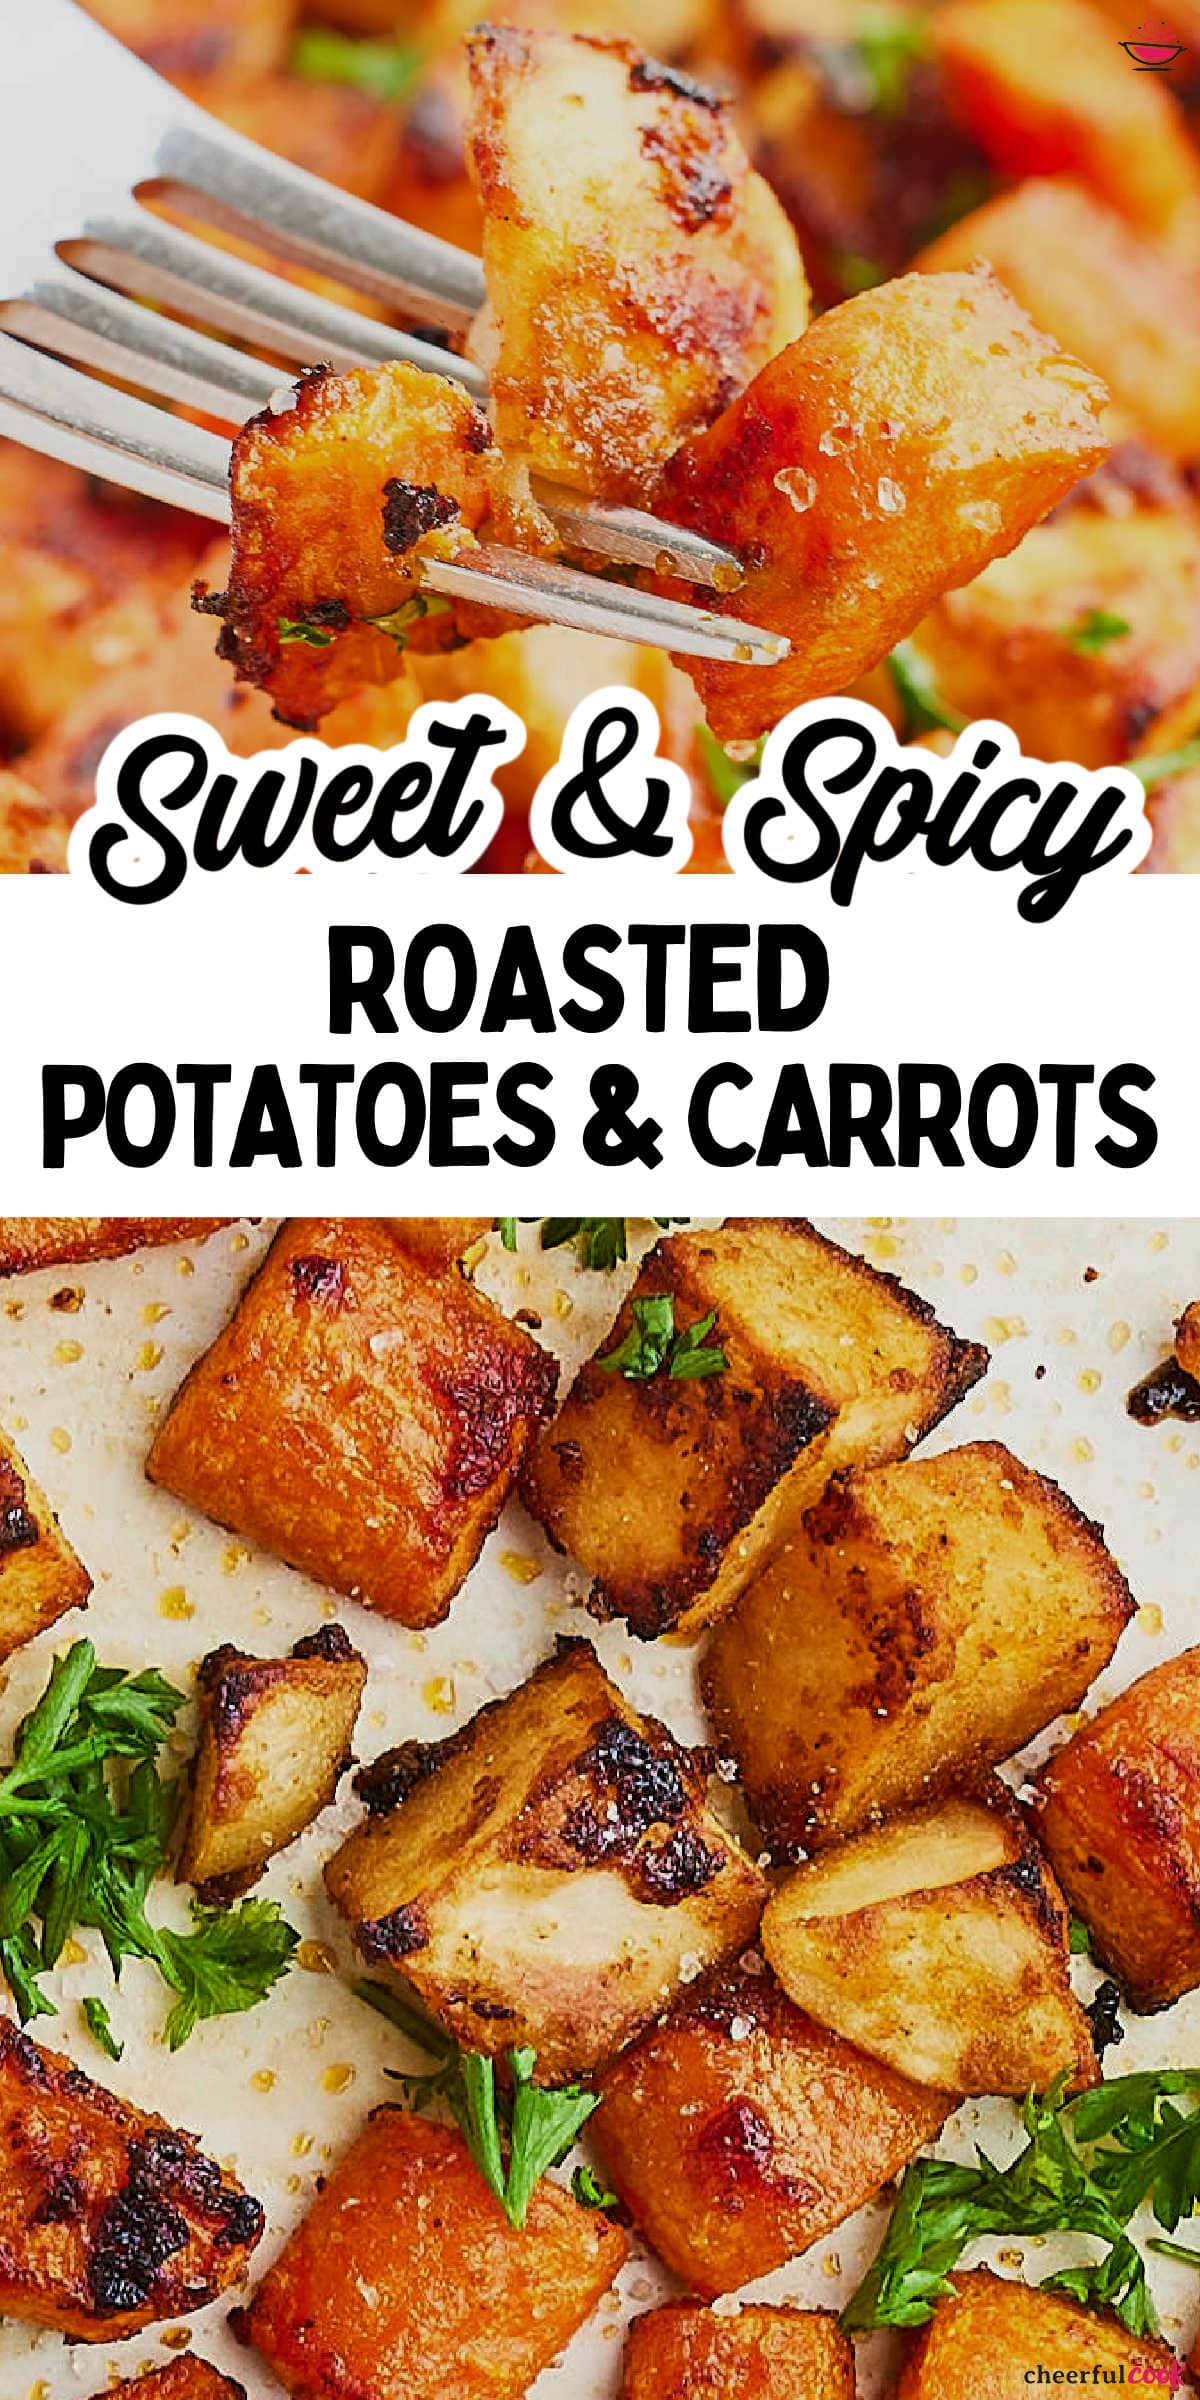 Craving a dish that's both hearty and flavorful? Try our Roasted Potatoes and Carrots Recipe! Sweet maple syrup, butter, and a perfect blend of spices make this side dish a real winner. #cheerfulcook #RoastedVeggies #roastedpotatoes #roastedcarrots #potatoesandcarrots #sidedish #easysidesh #comfortfood via @cheerfulcook